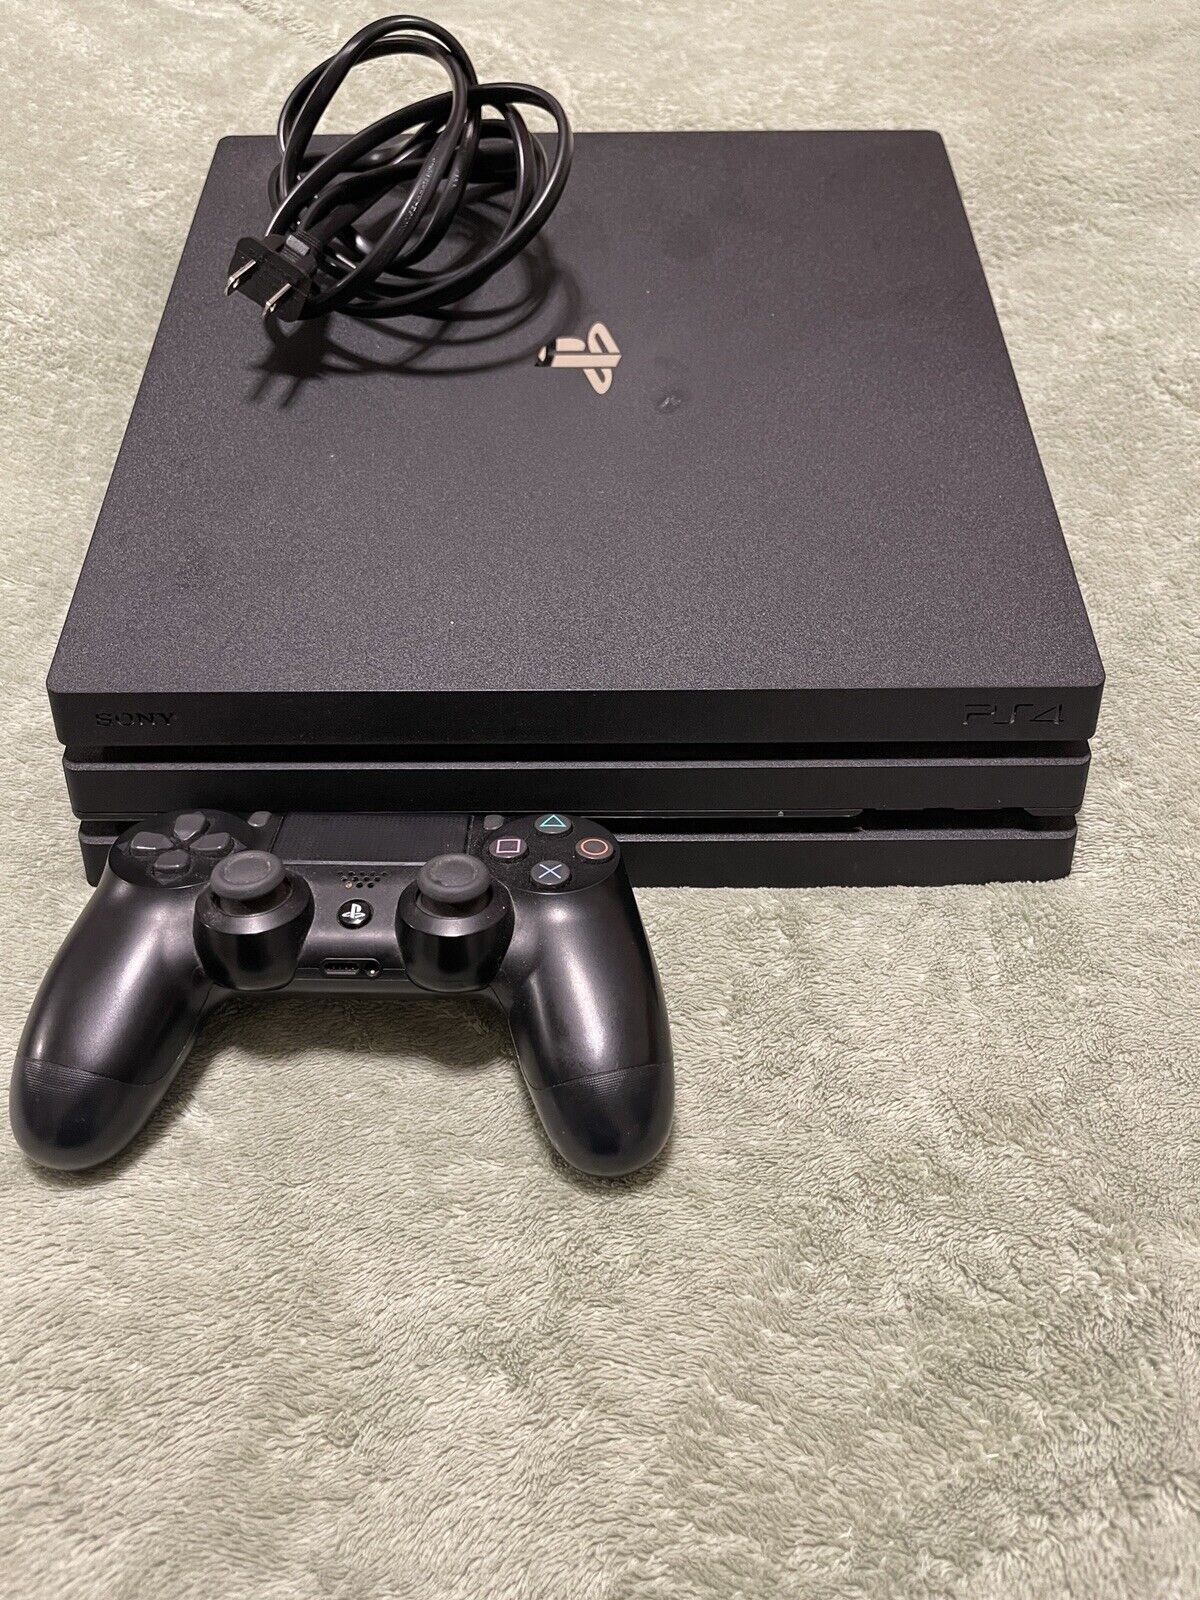 Sony PlayStation 4 Pro PS4 Pro - 1TB - Black Console - Very Good Condition